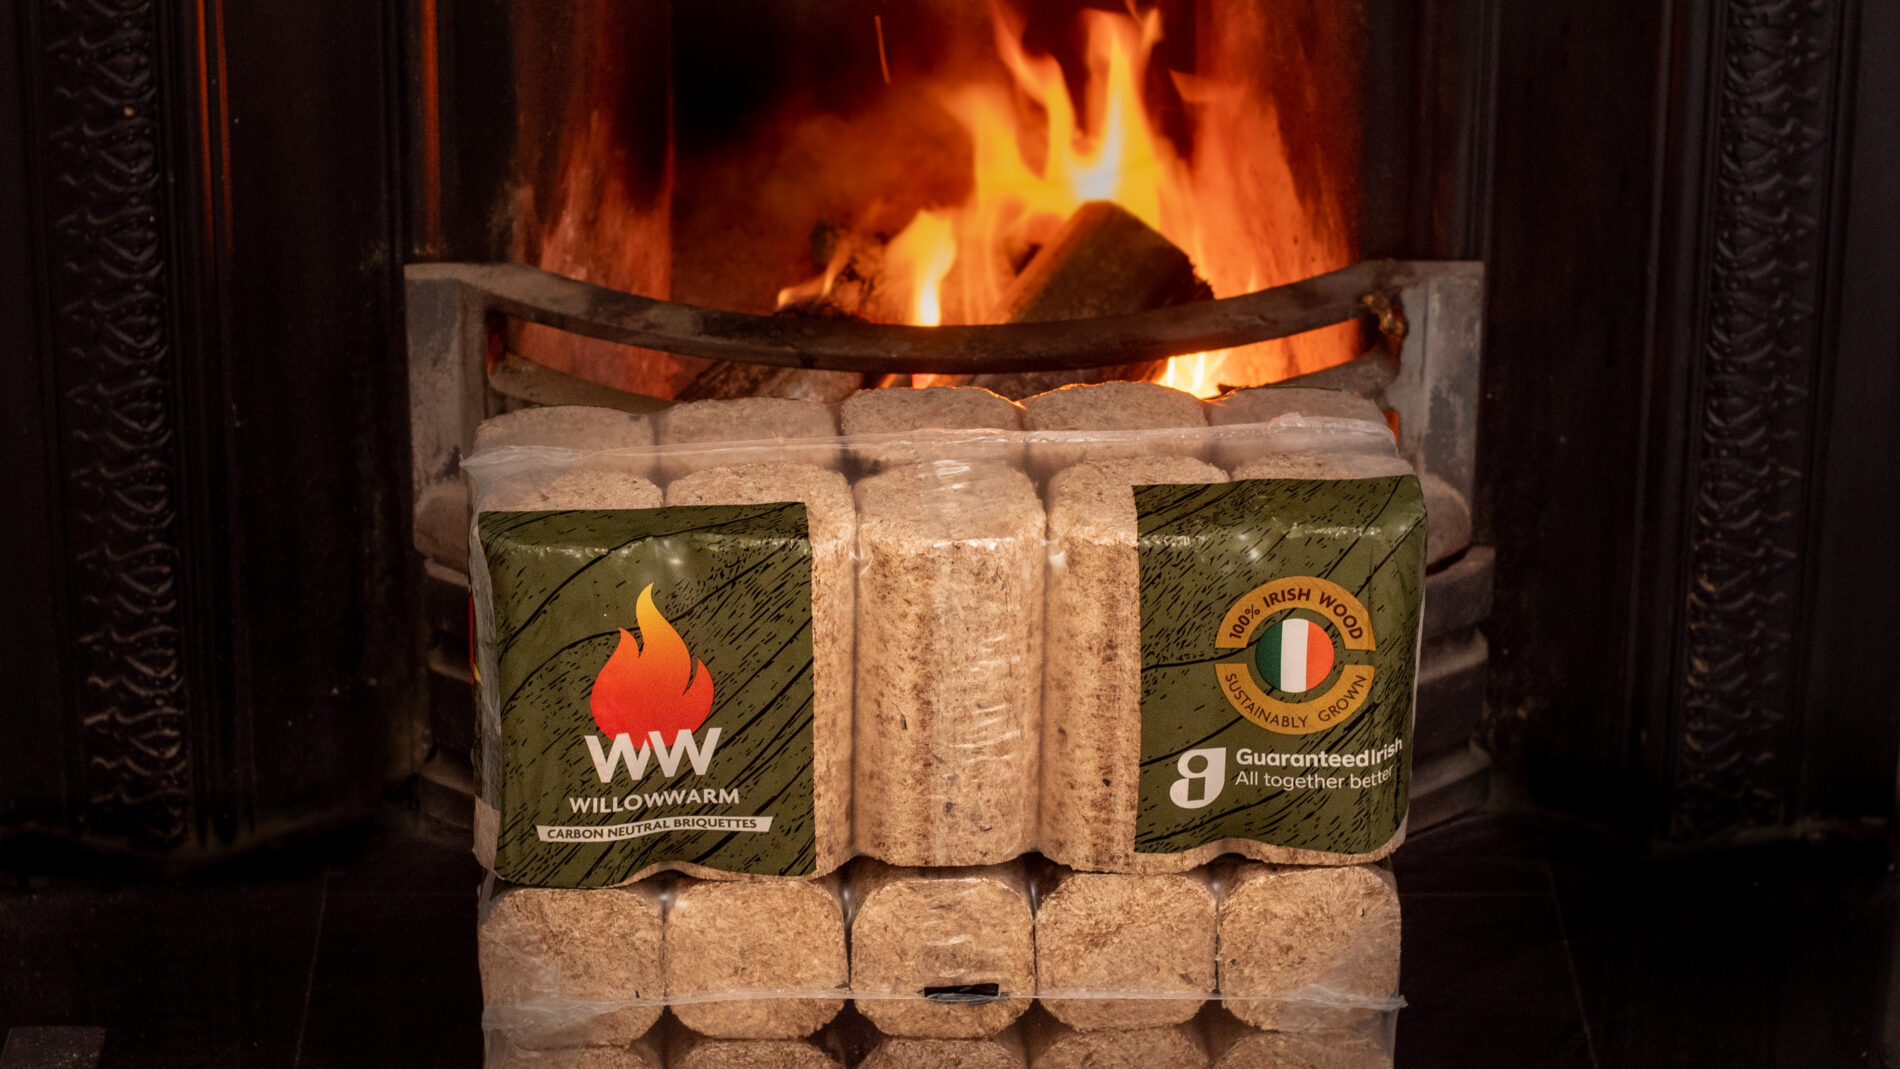 WillowWarm Briquette bales sitting in front of an open fire